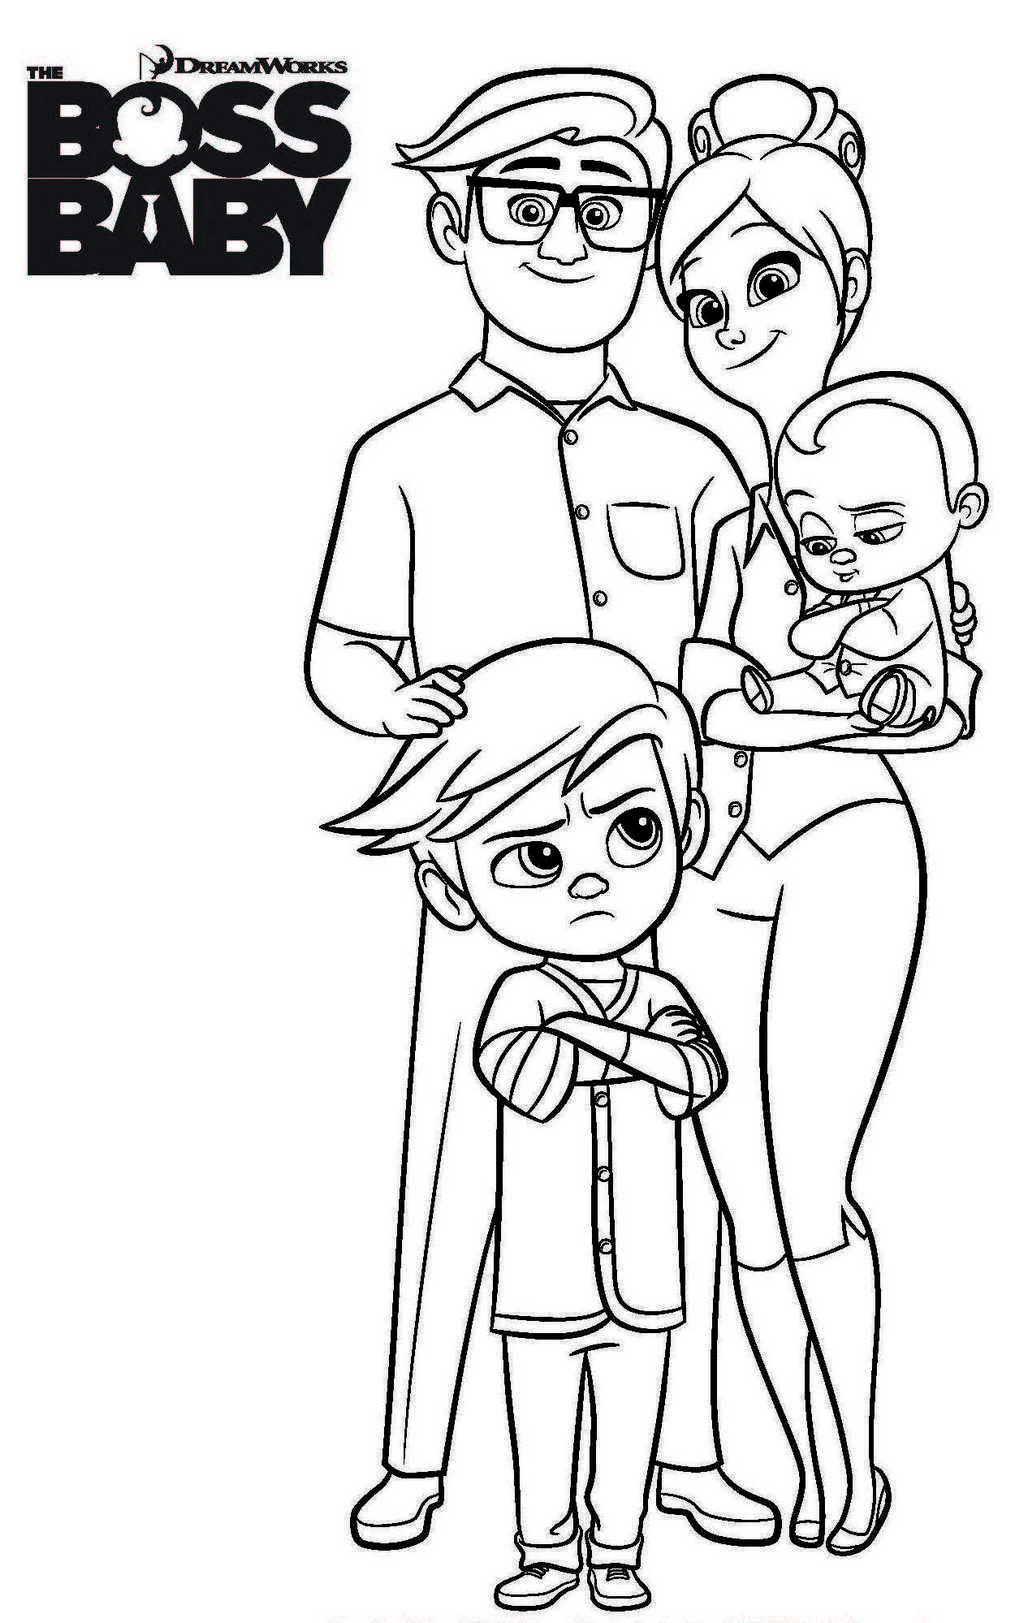 Boss Baby Coloring Pages
 The Boss Baby Coloring Pages